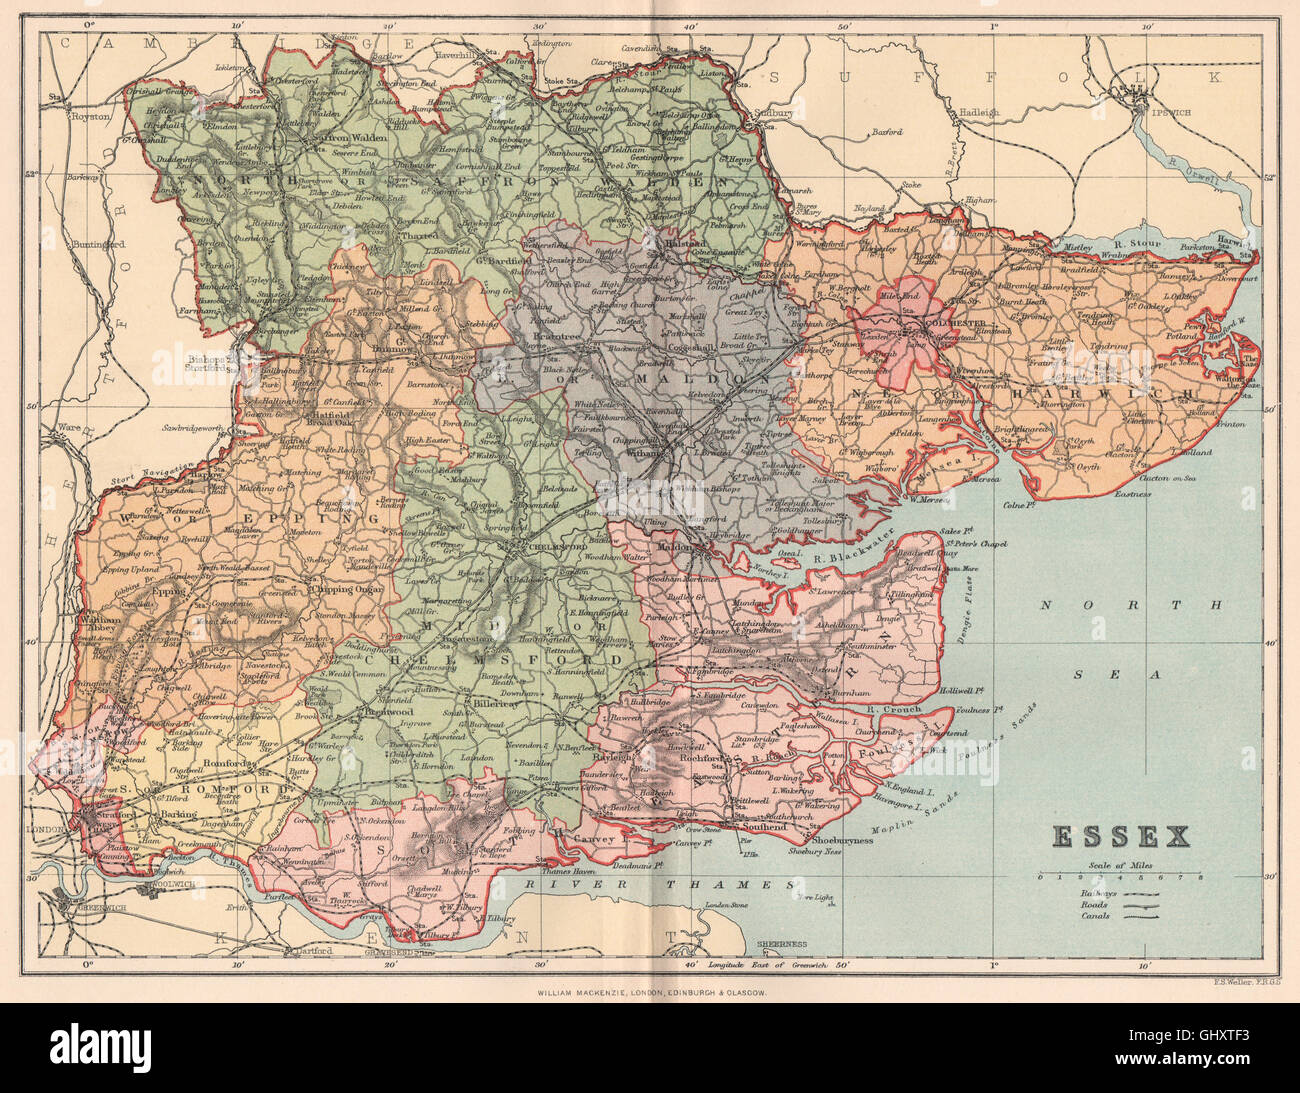 ESSEX. Antique county map, 1893 Foto Stock